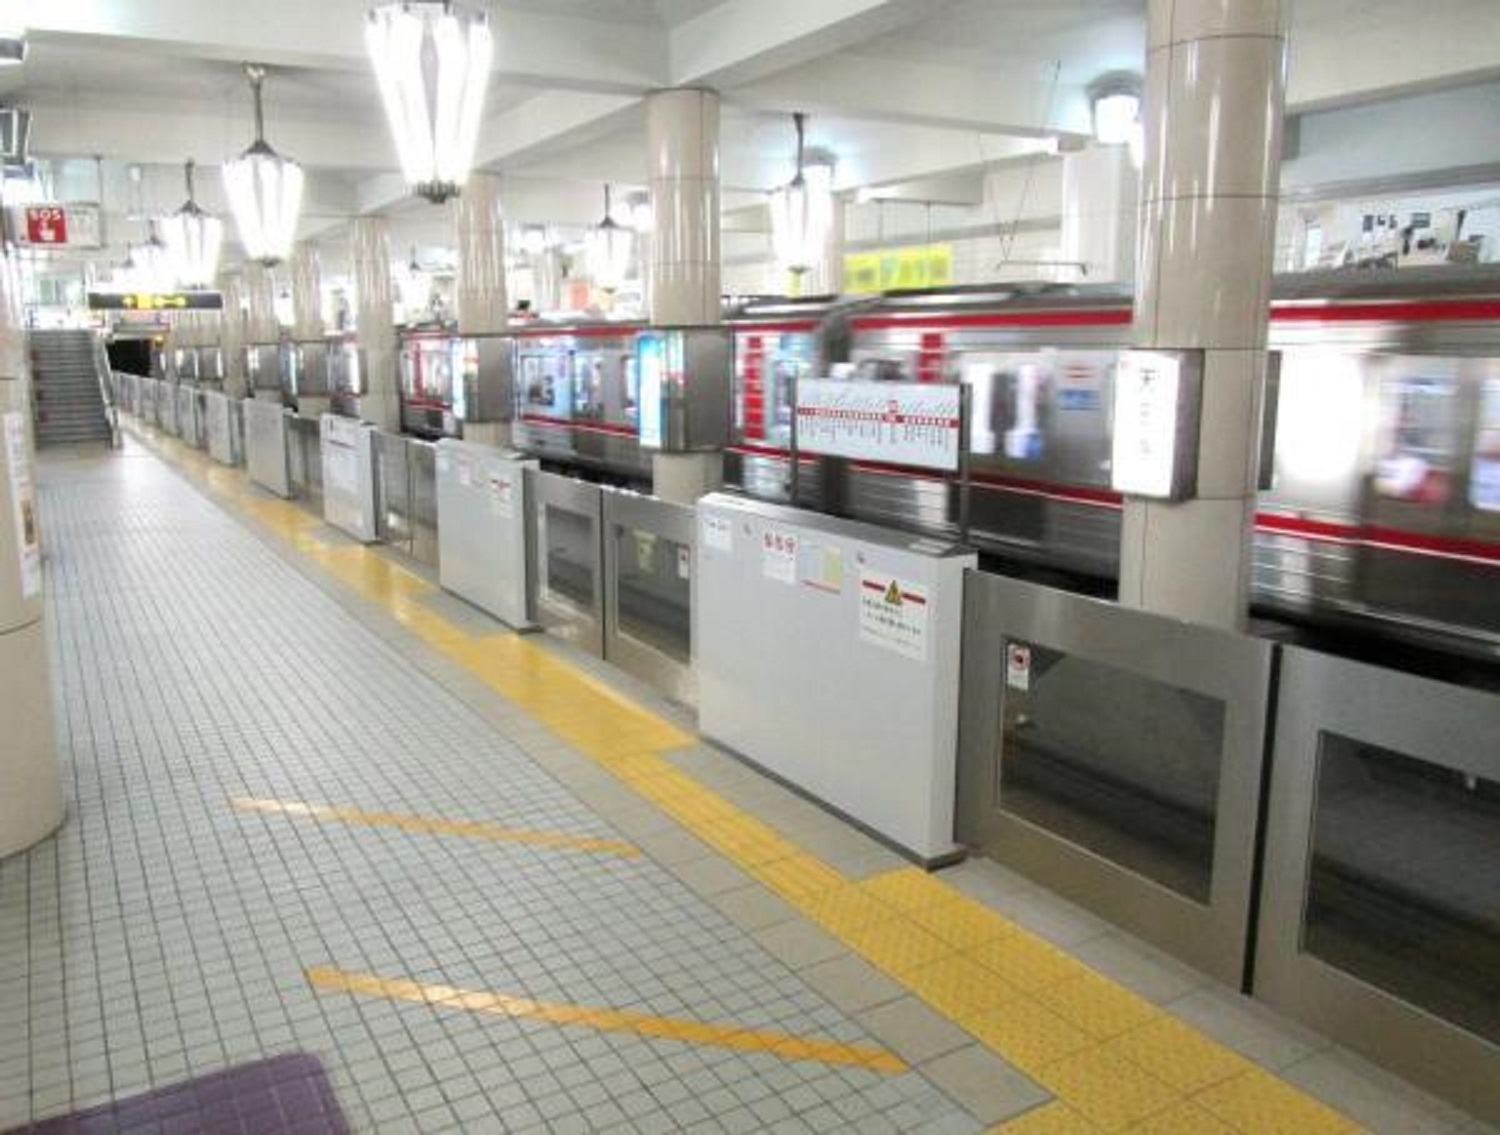 2031, Automatic Platform Gates Market Size and Reports by R&I